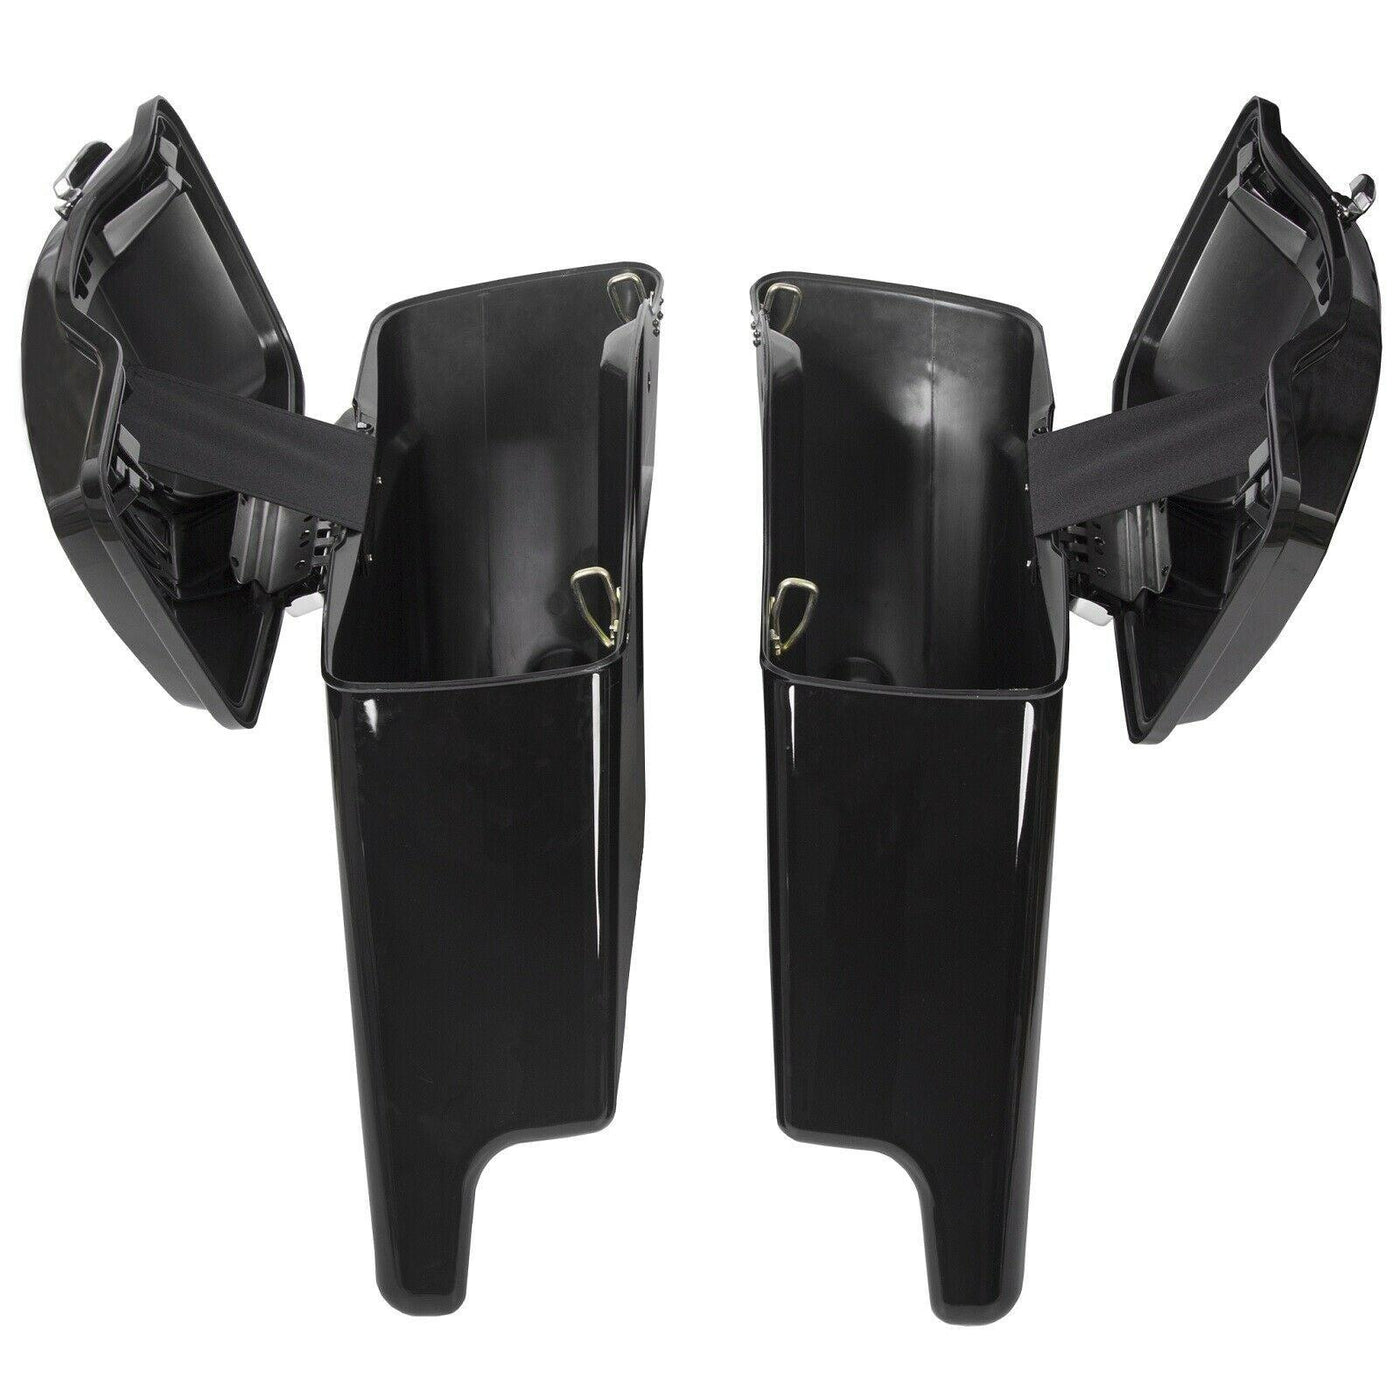 5" Stretched Extended Hard Saddle Bags For Harley Electra Glide Road King 93-13 - Moto Life Products